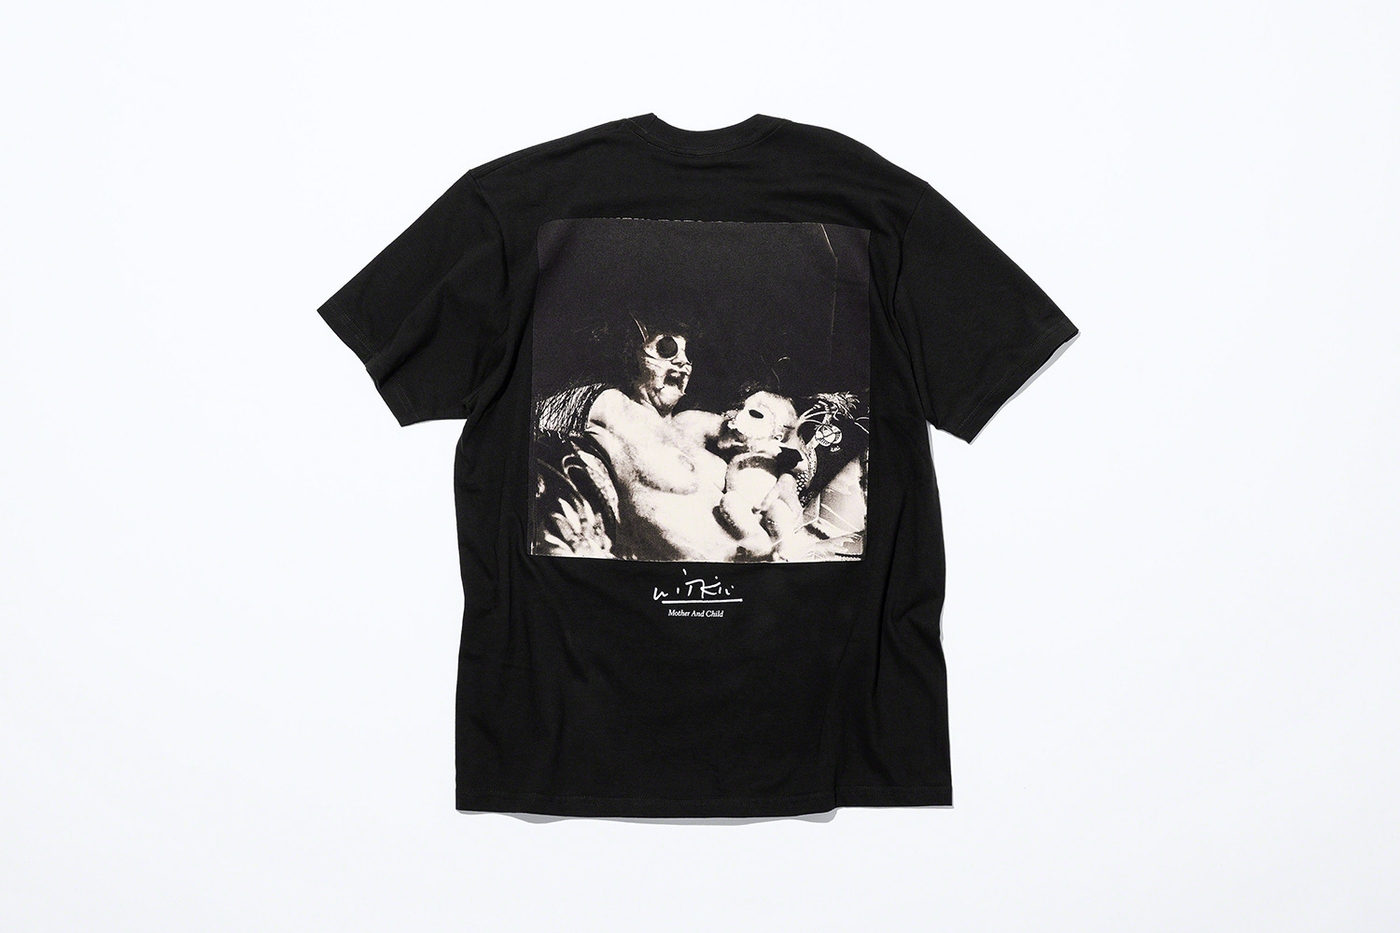 Mother and Child Tee. Original artwork by Joel-Peter Witkin. (10/11)